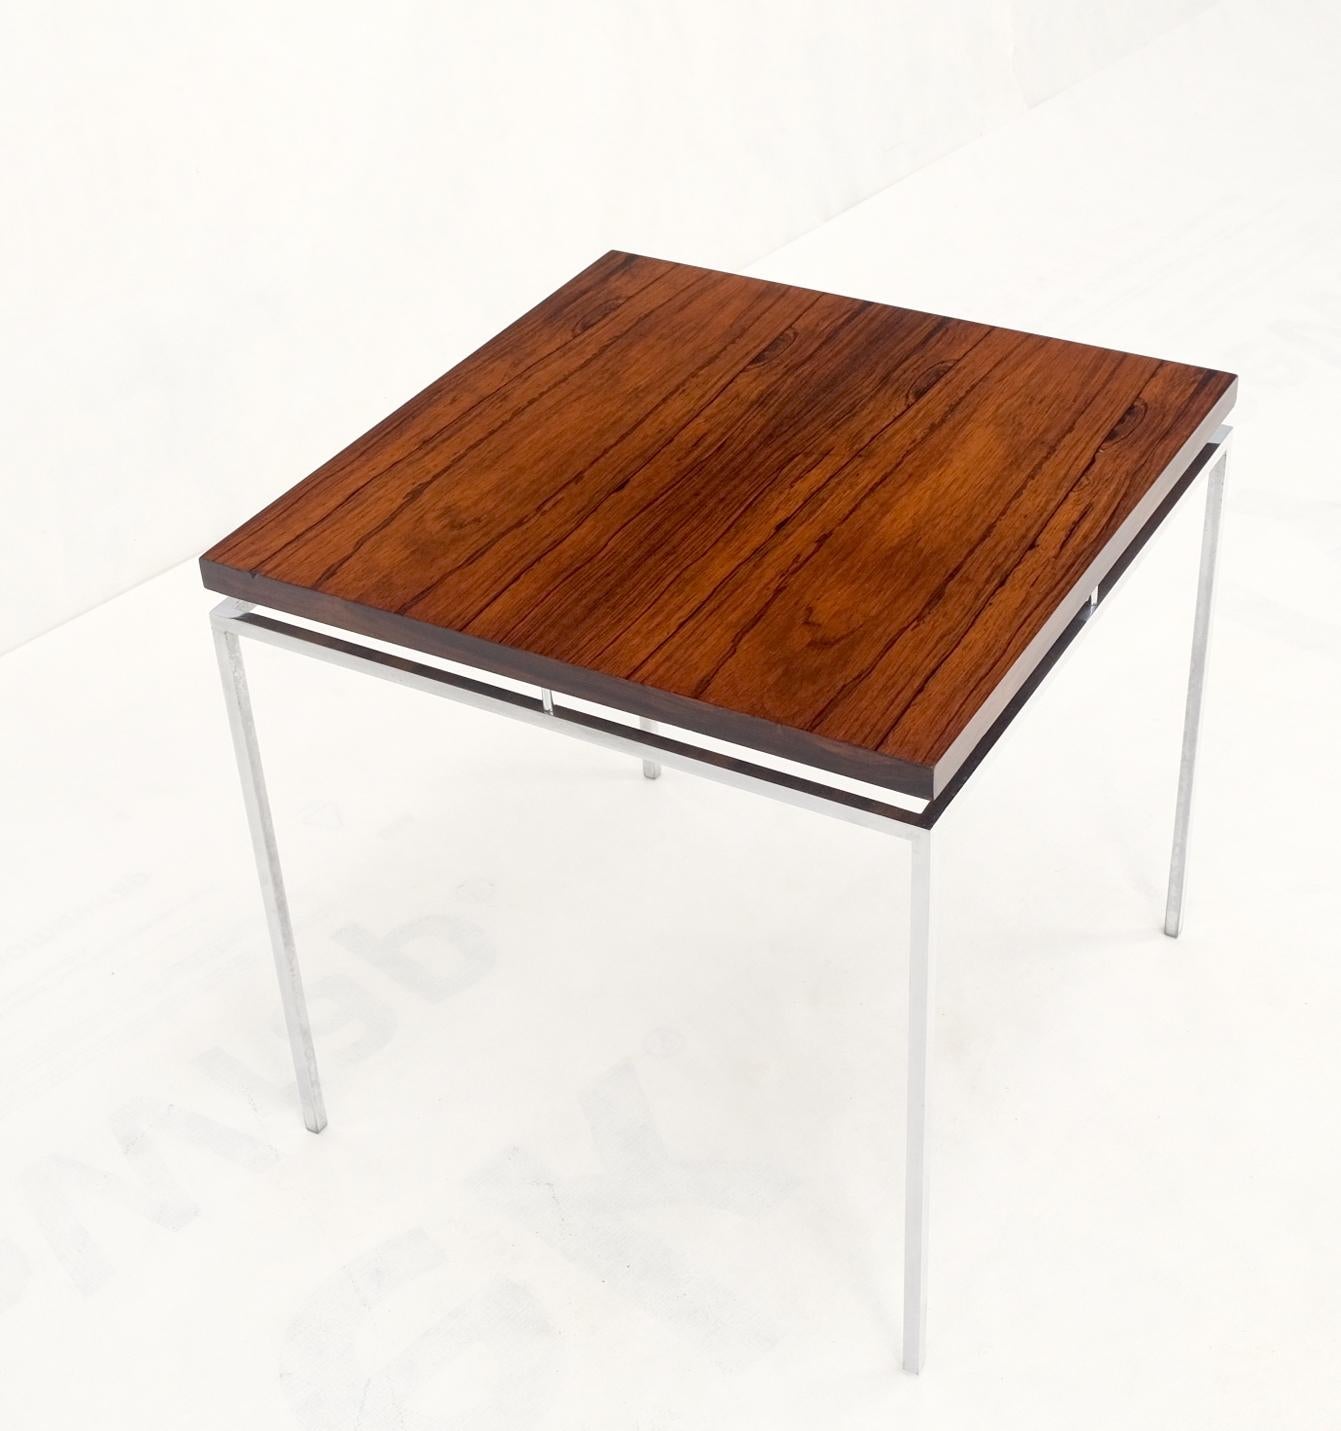 Floating Rosewood Top Chrome Stainless Base Square Side End Coffee Table Mint In Good Condition For Sale In Rockaway, NJ